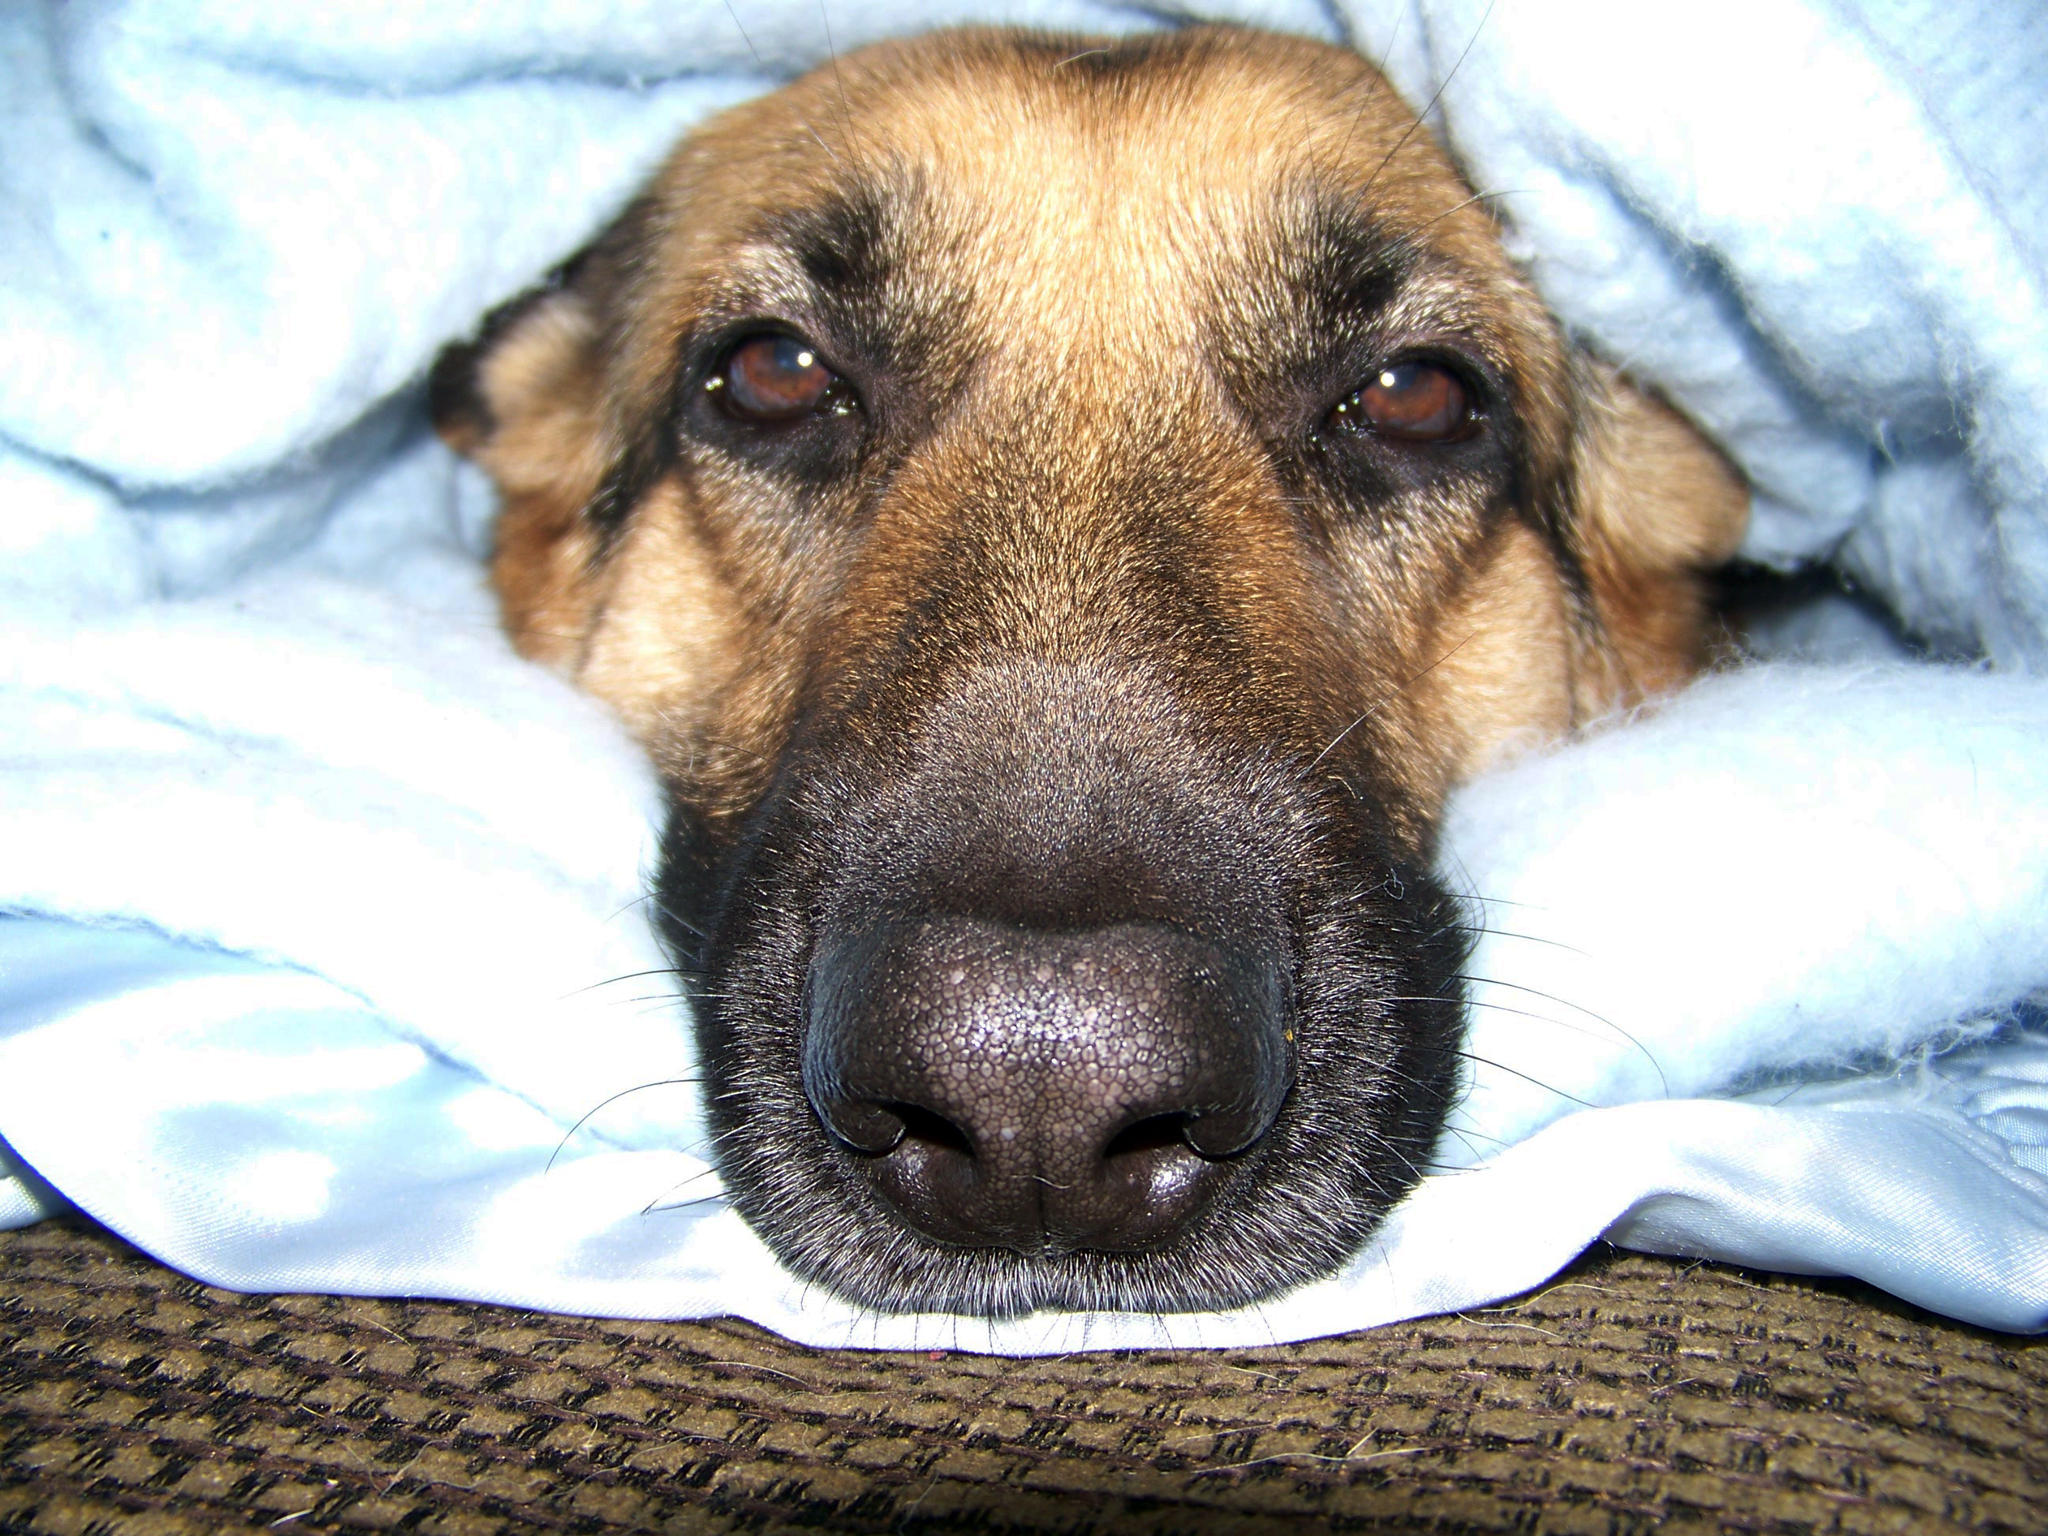 german shepherd Oprah with only her head sticking out of a blanket